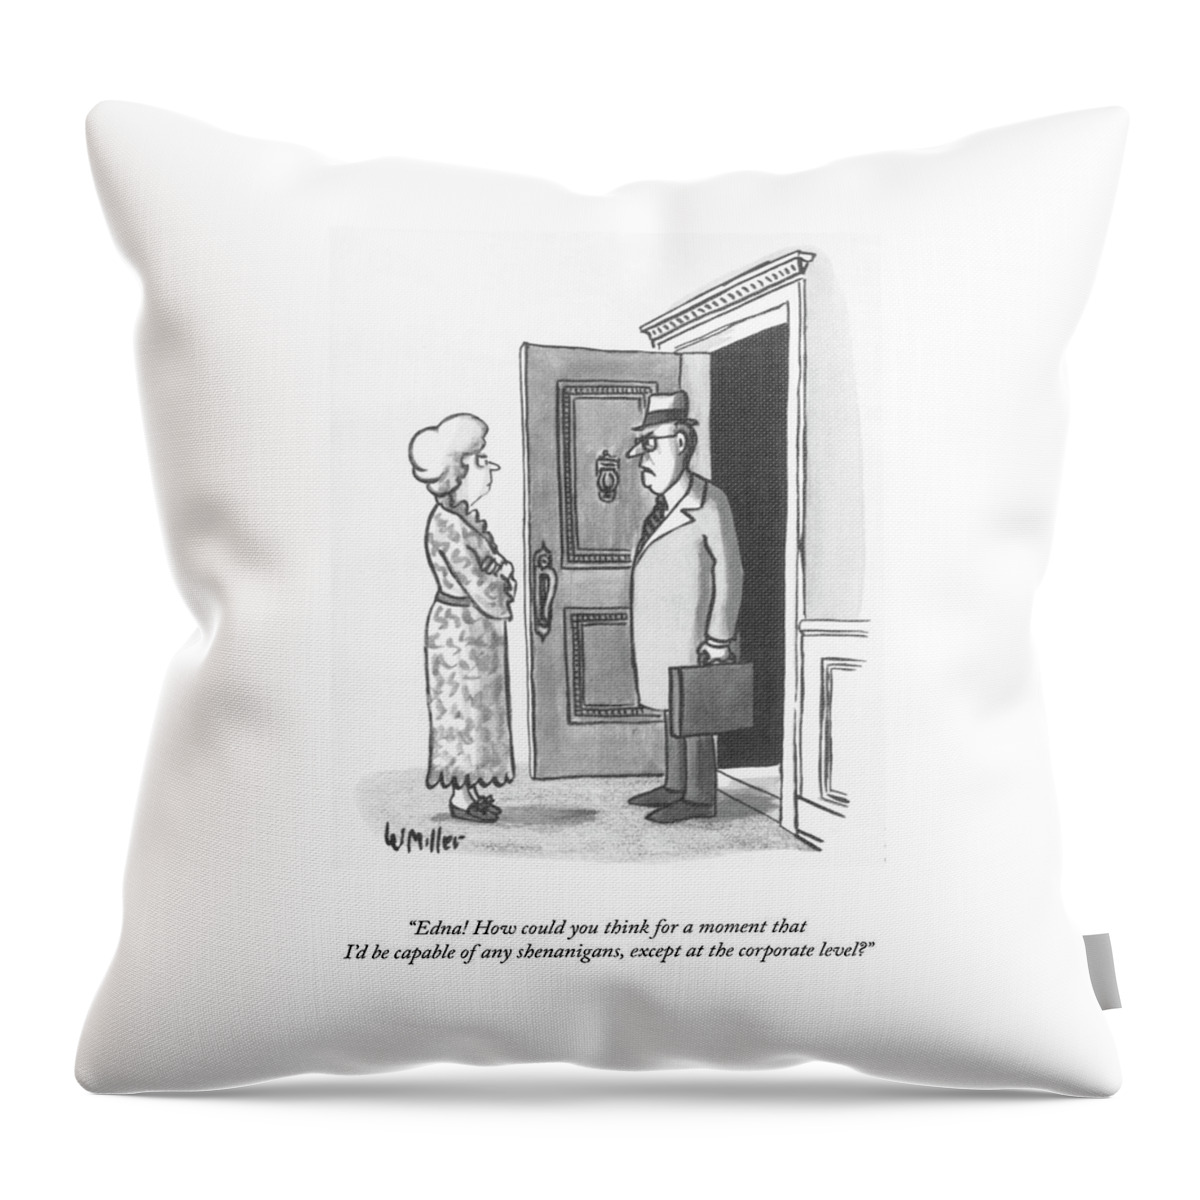 Corporate Level Shenanigans Throw Pillow